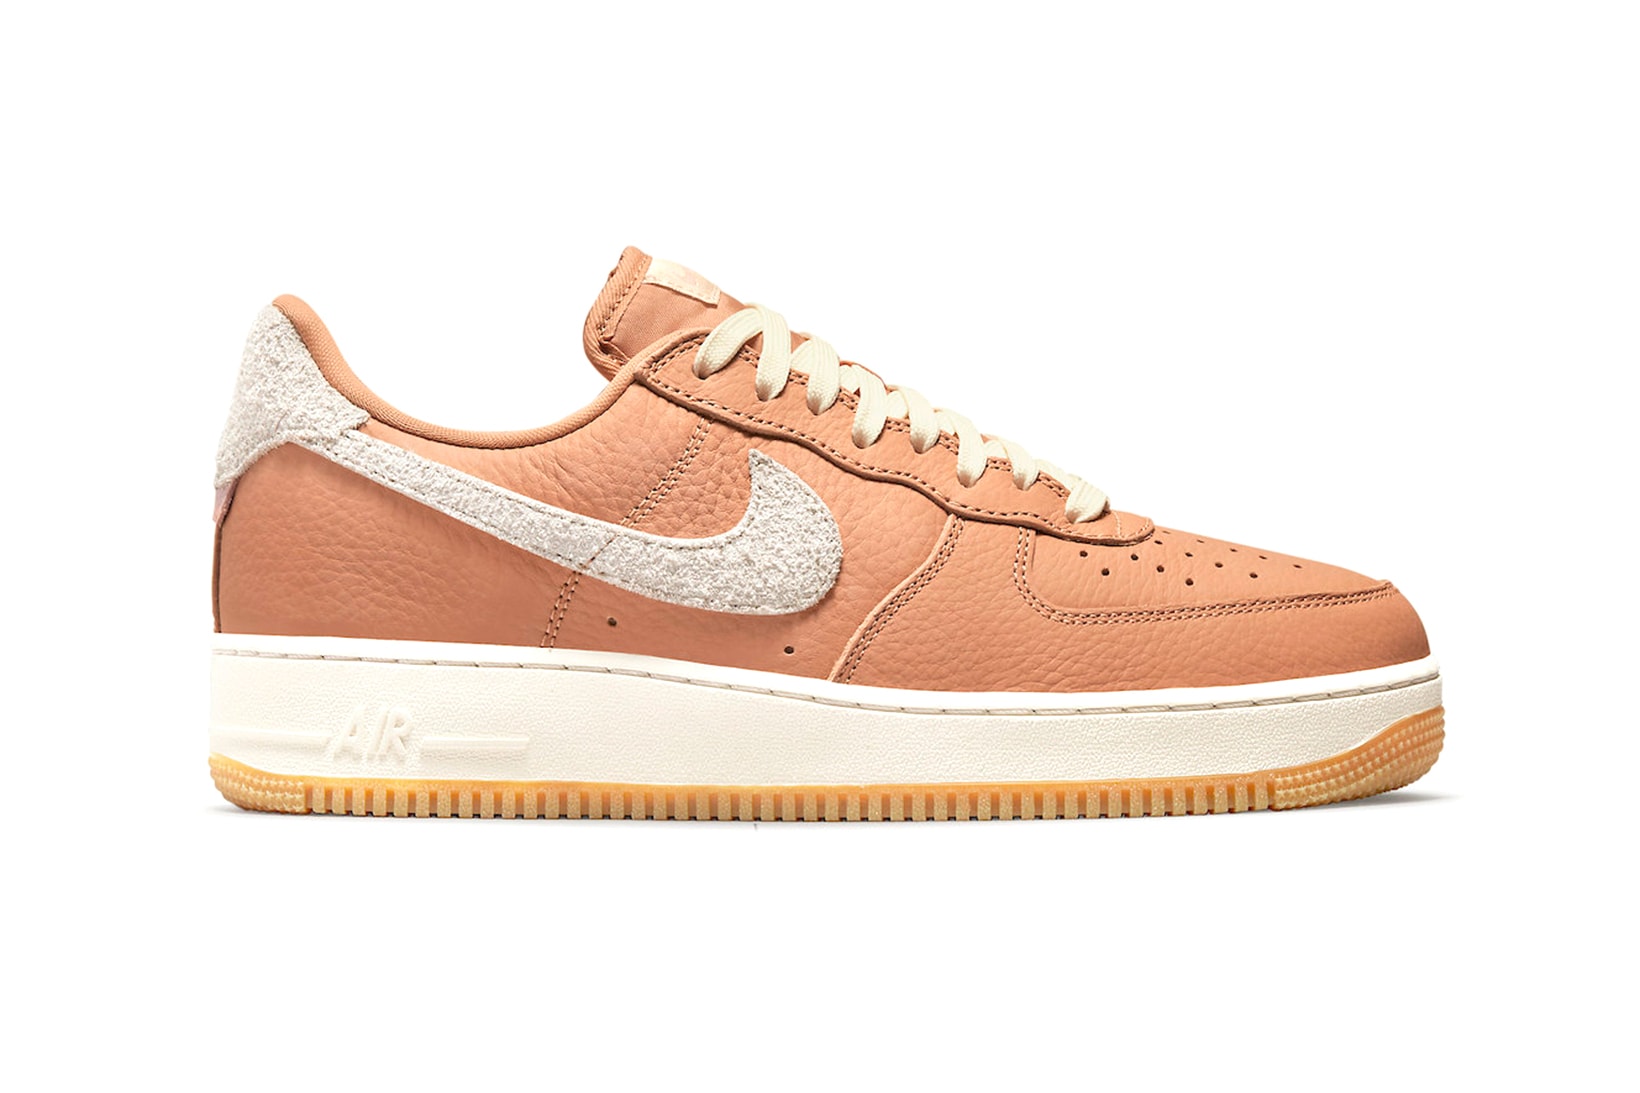 Nike Air Force 1 Craft Sneakers Beige Gum Price Release Date Side View